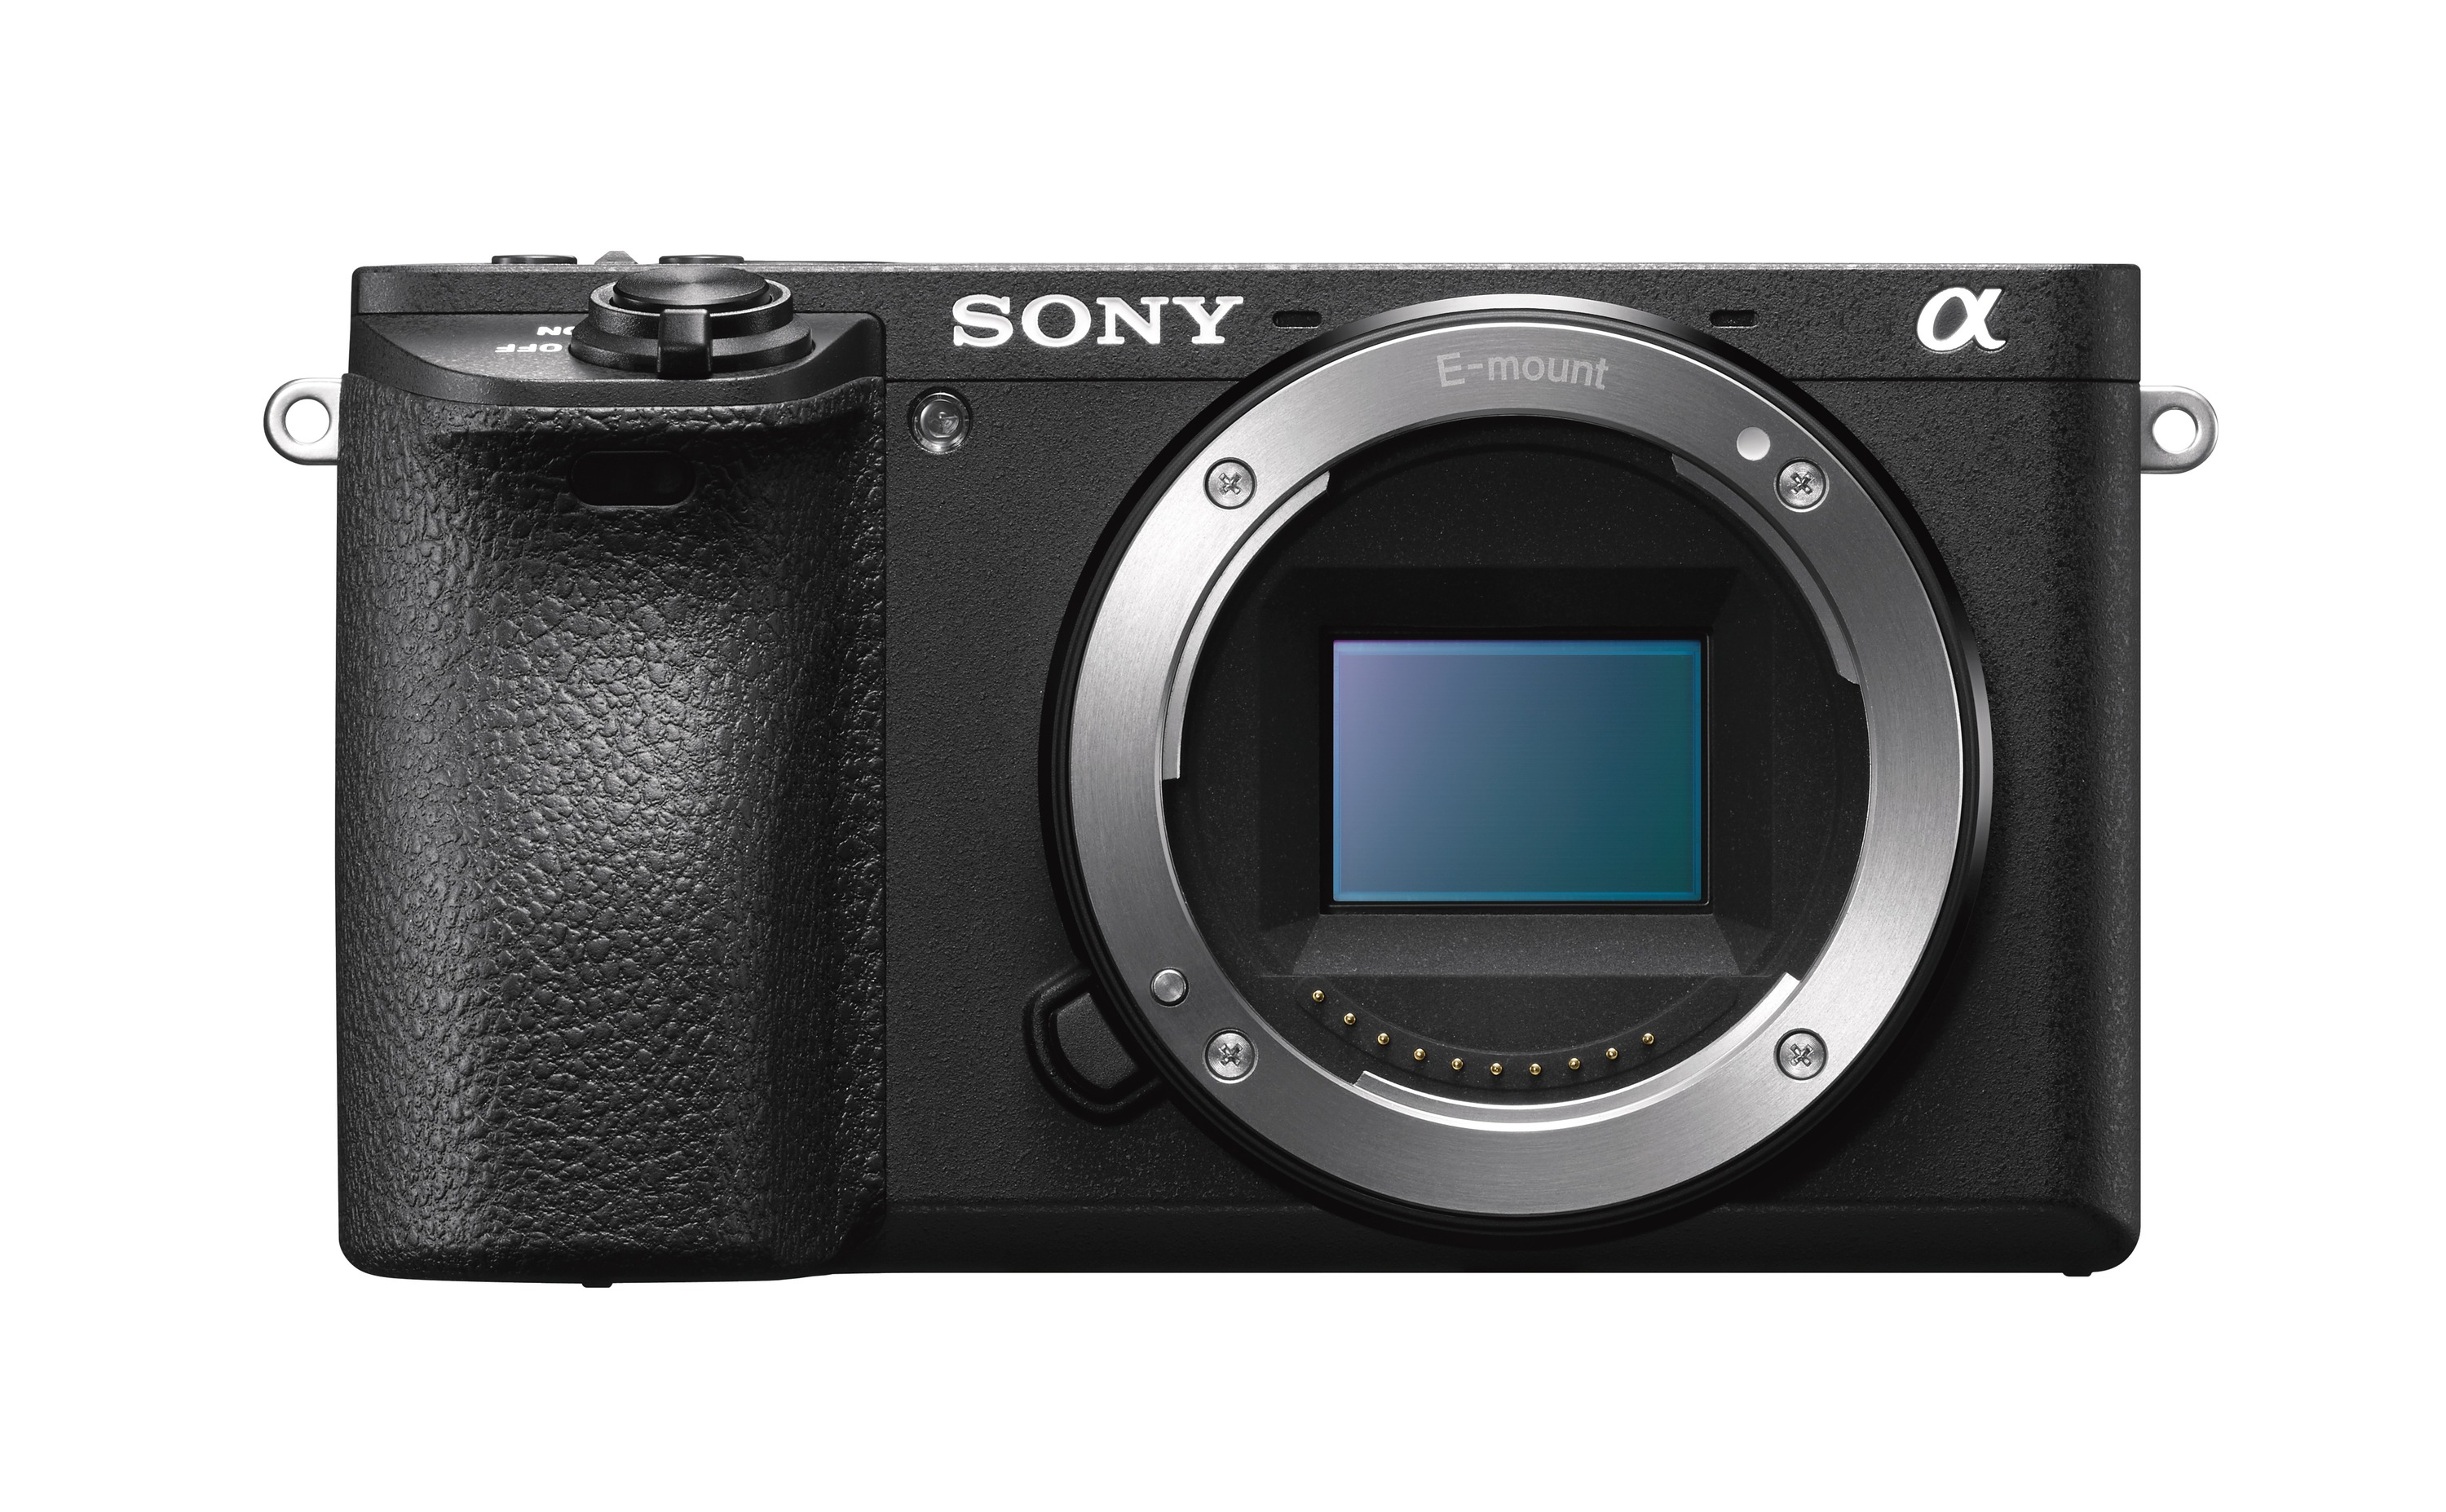 Sony Alpha a6500 Mirrorless Interchangeable-lens Camera - Black - image 4 of 7